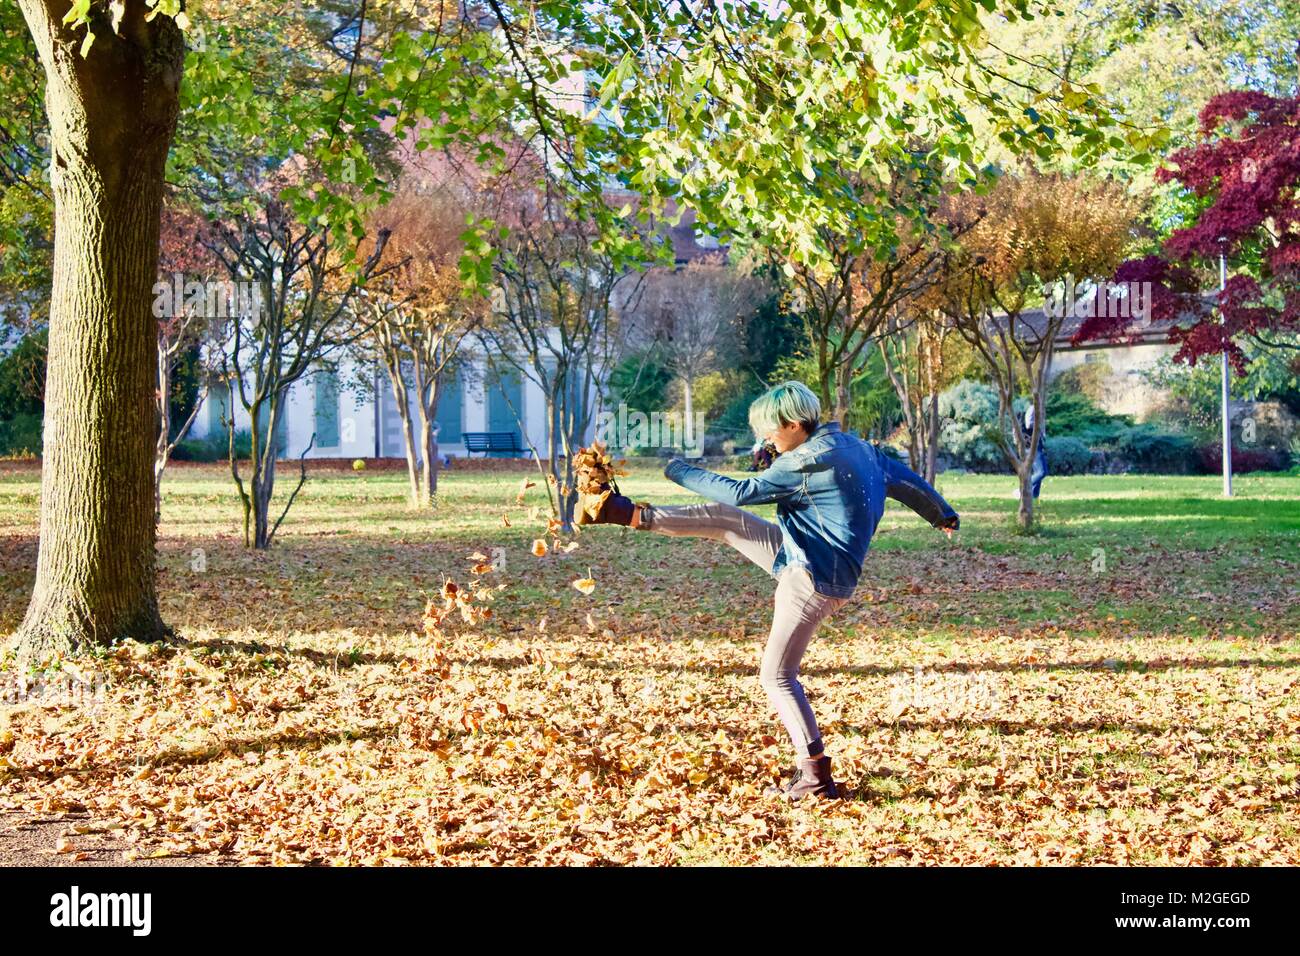 Adolescent with green hair kicking dead leaves up in the air in an empty park with lots of leaves on the ground Stock Photo